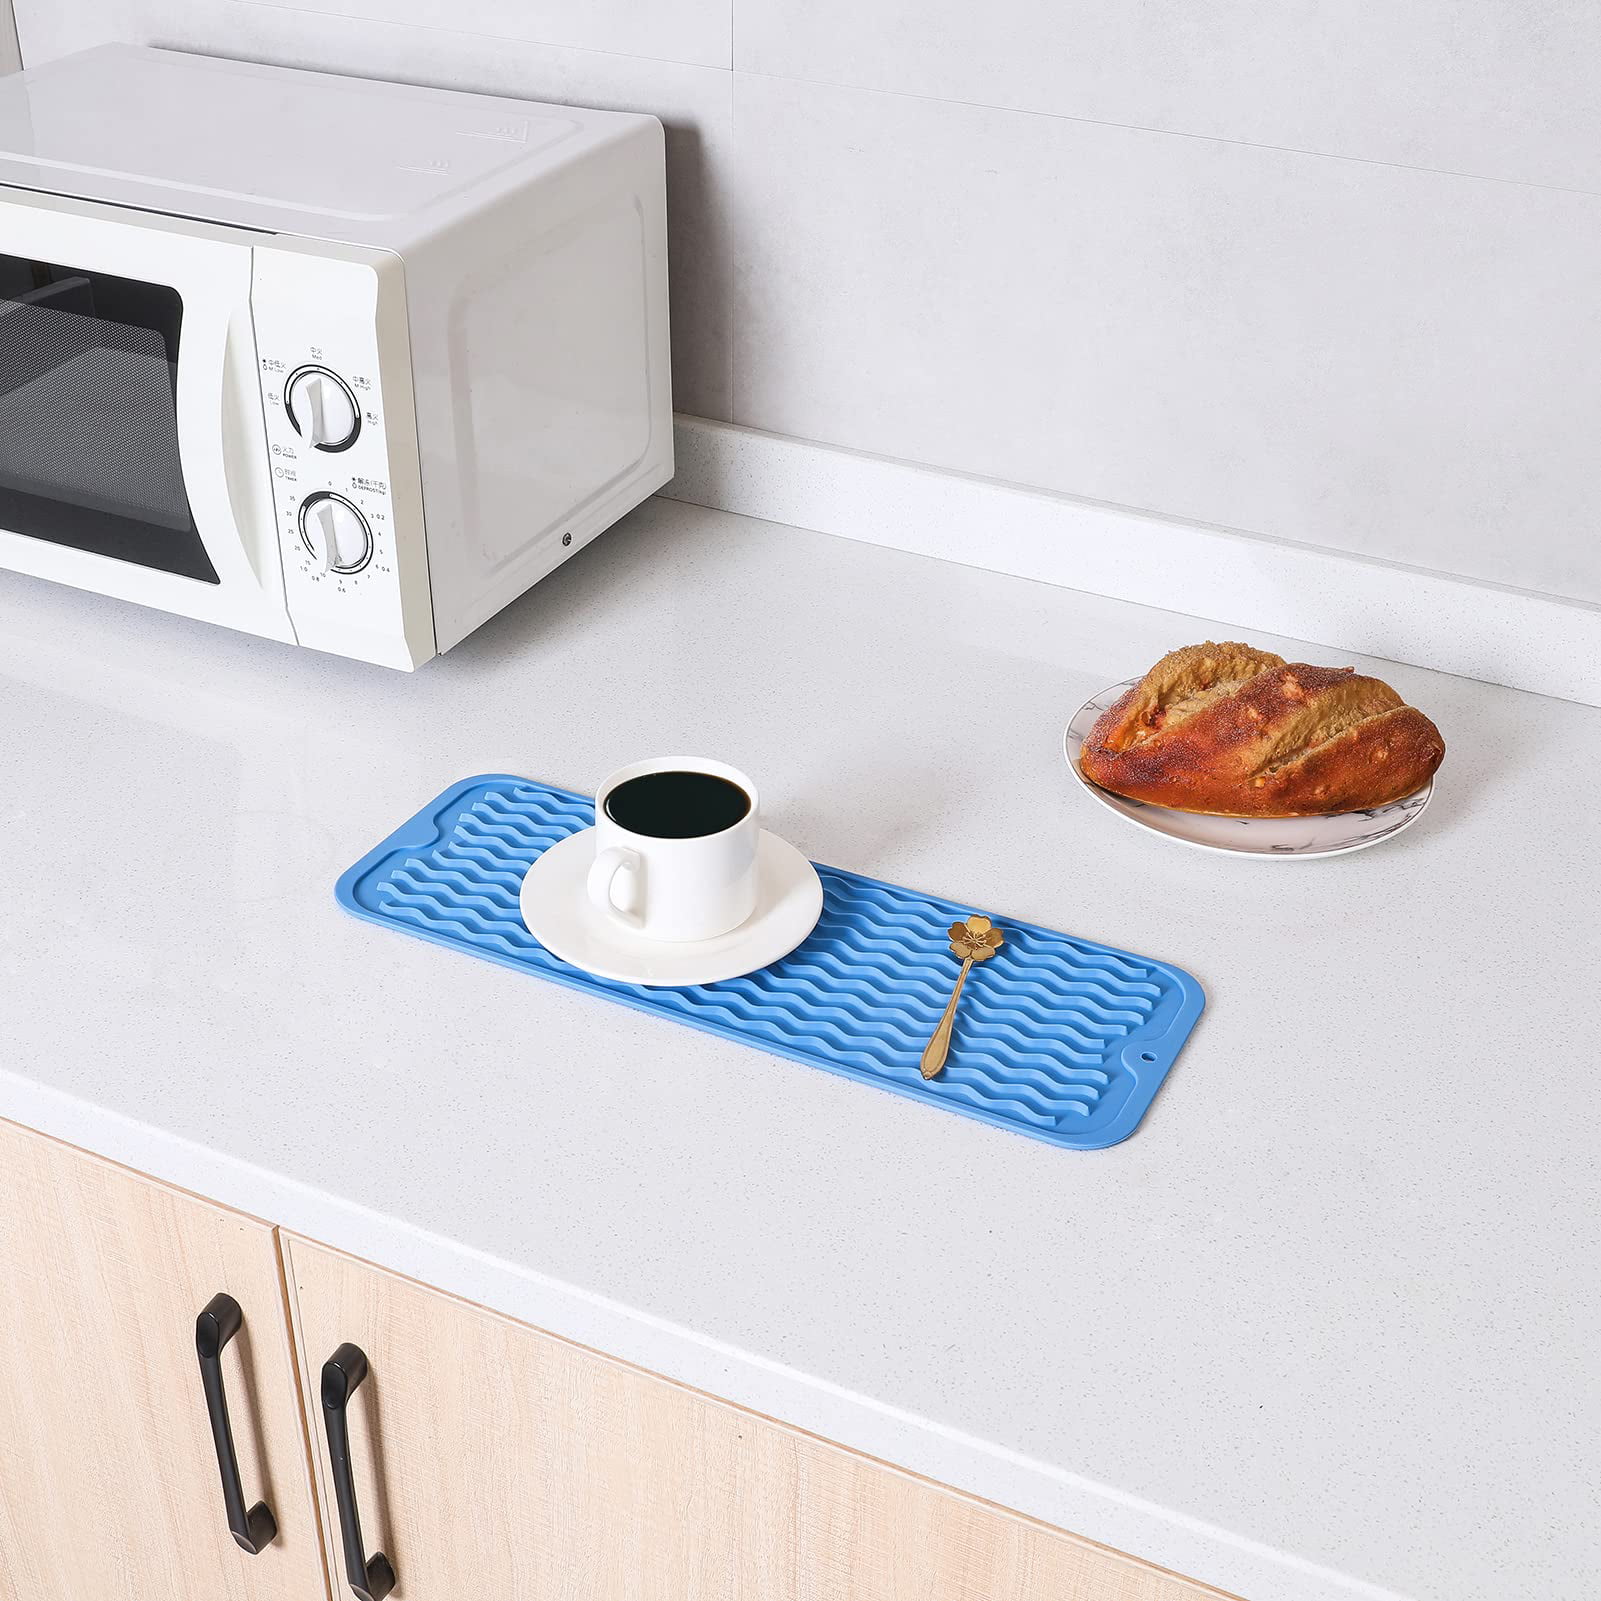  RECER Silicone Dish Drying Mat, Heat-resistant Drying Mat for  Kitchen Counter, Easy to Drain and Clean,Eco-friendly, Non-Slip, Counter,  Sink, or Bar : Home & Kitchen